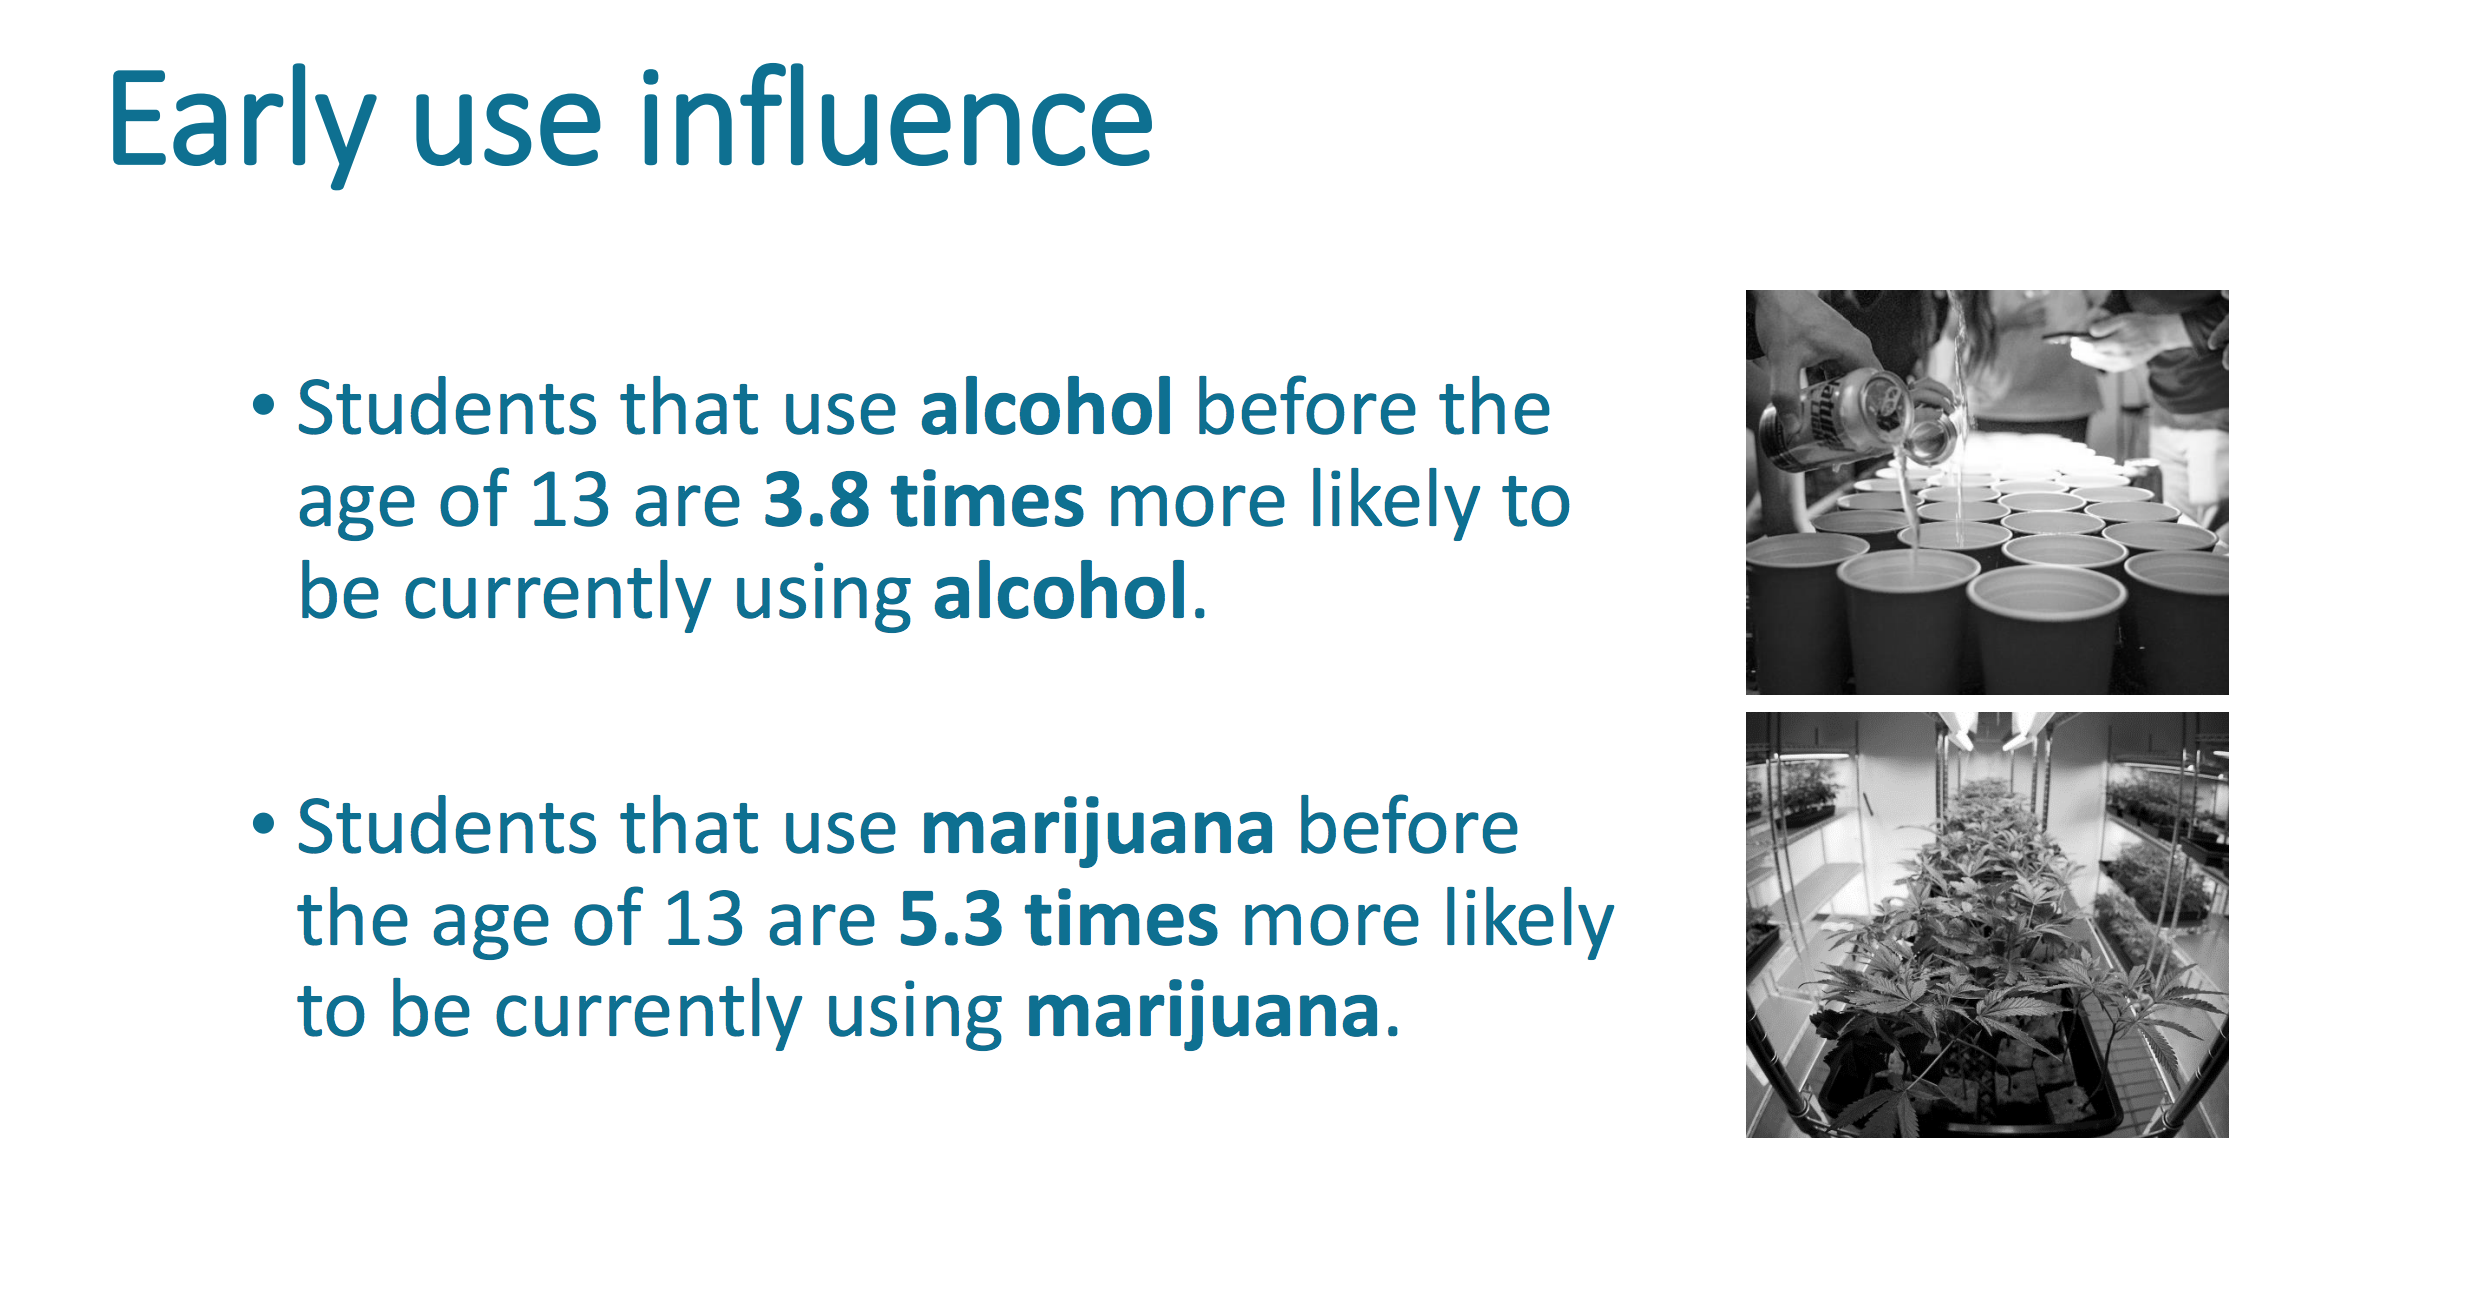 Students that use alcohol before the age of 13 are 3.8 times more likely to be currently using alcohol. Students who use marijuana before the age of 13 are 5.3 times more likely to be currently using marijuana.